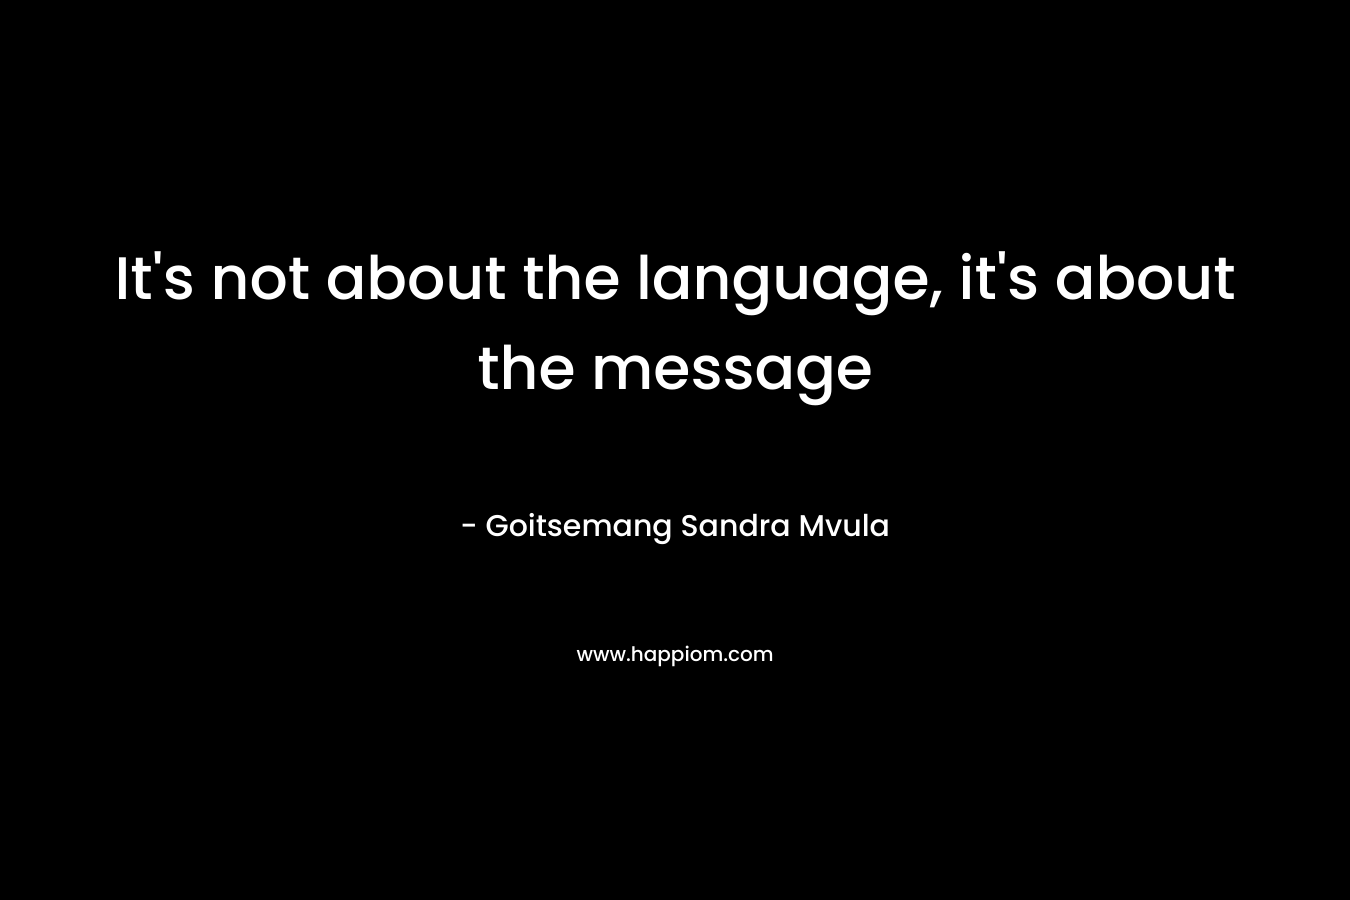 It's not about the language, it's about the message